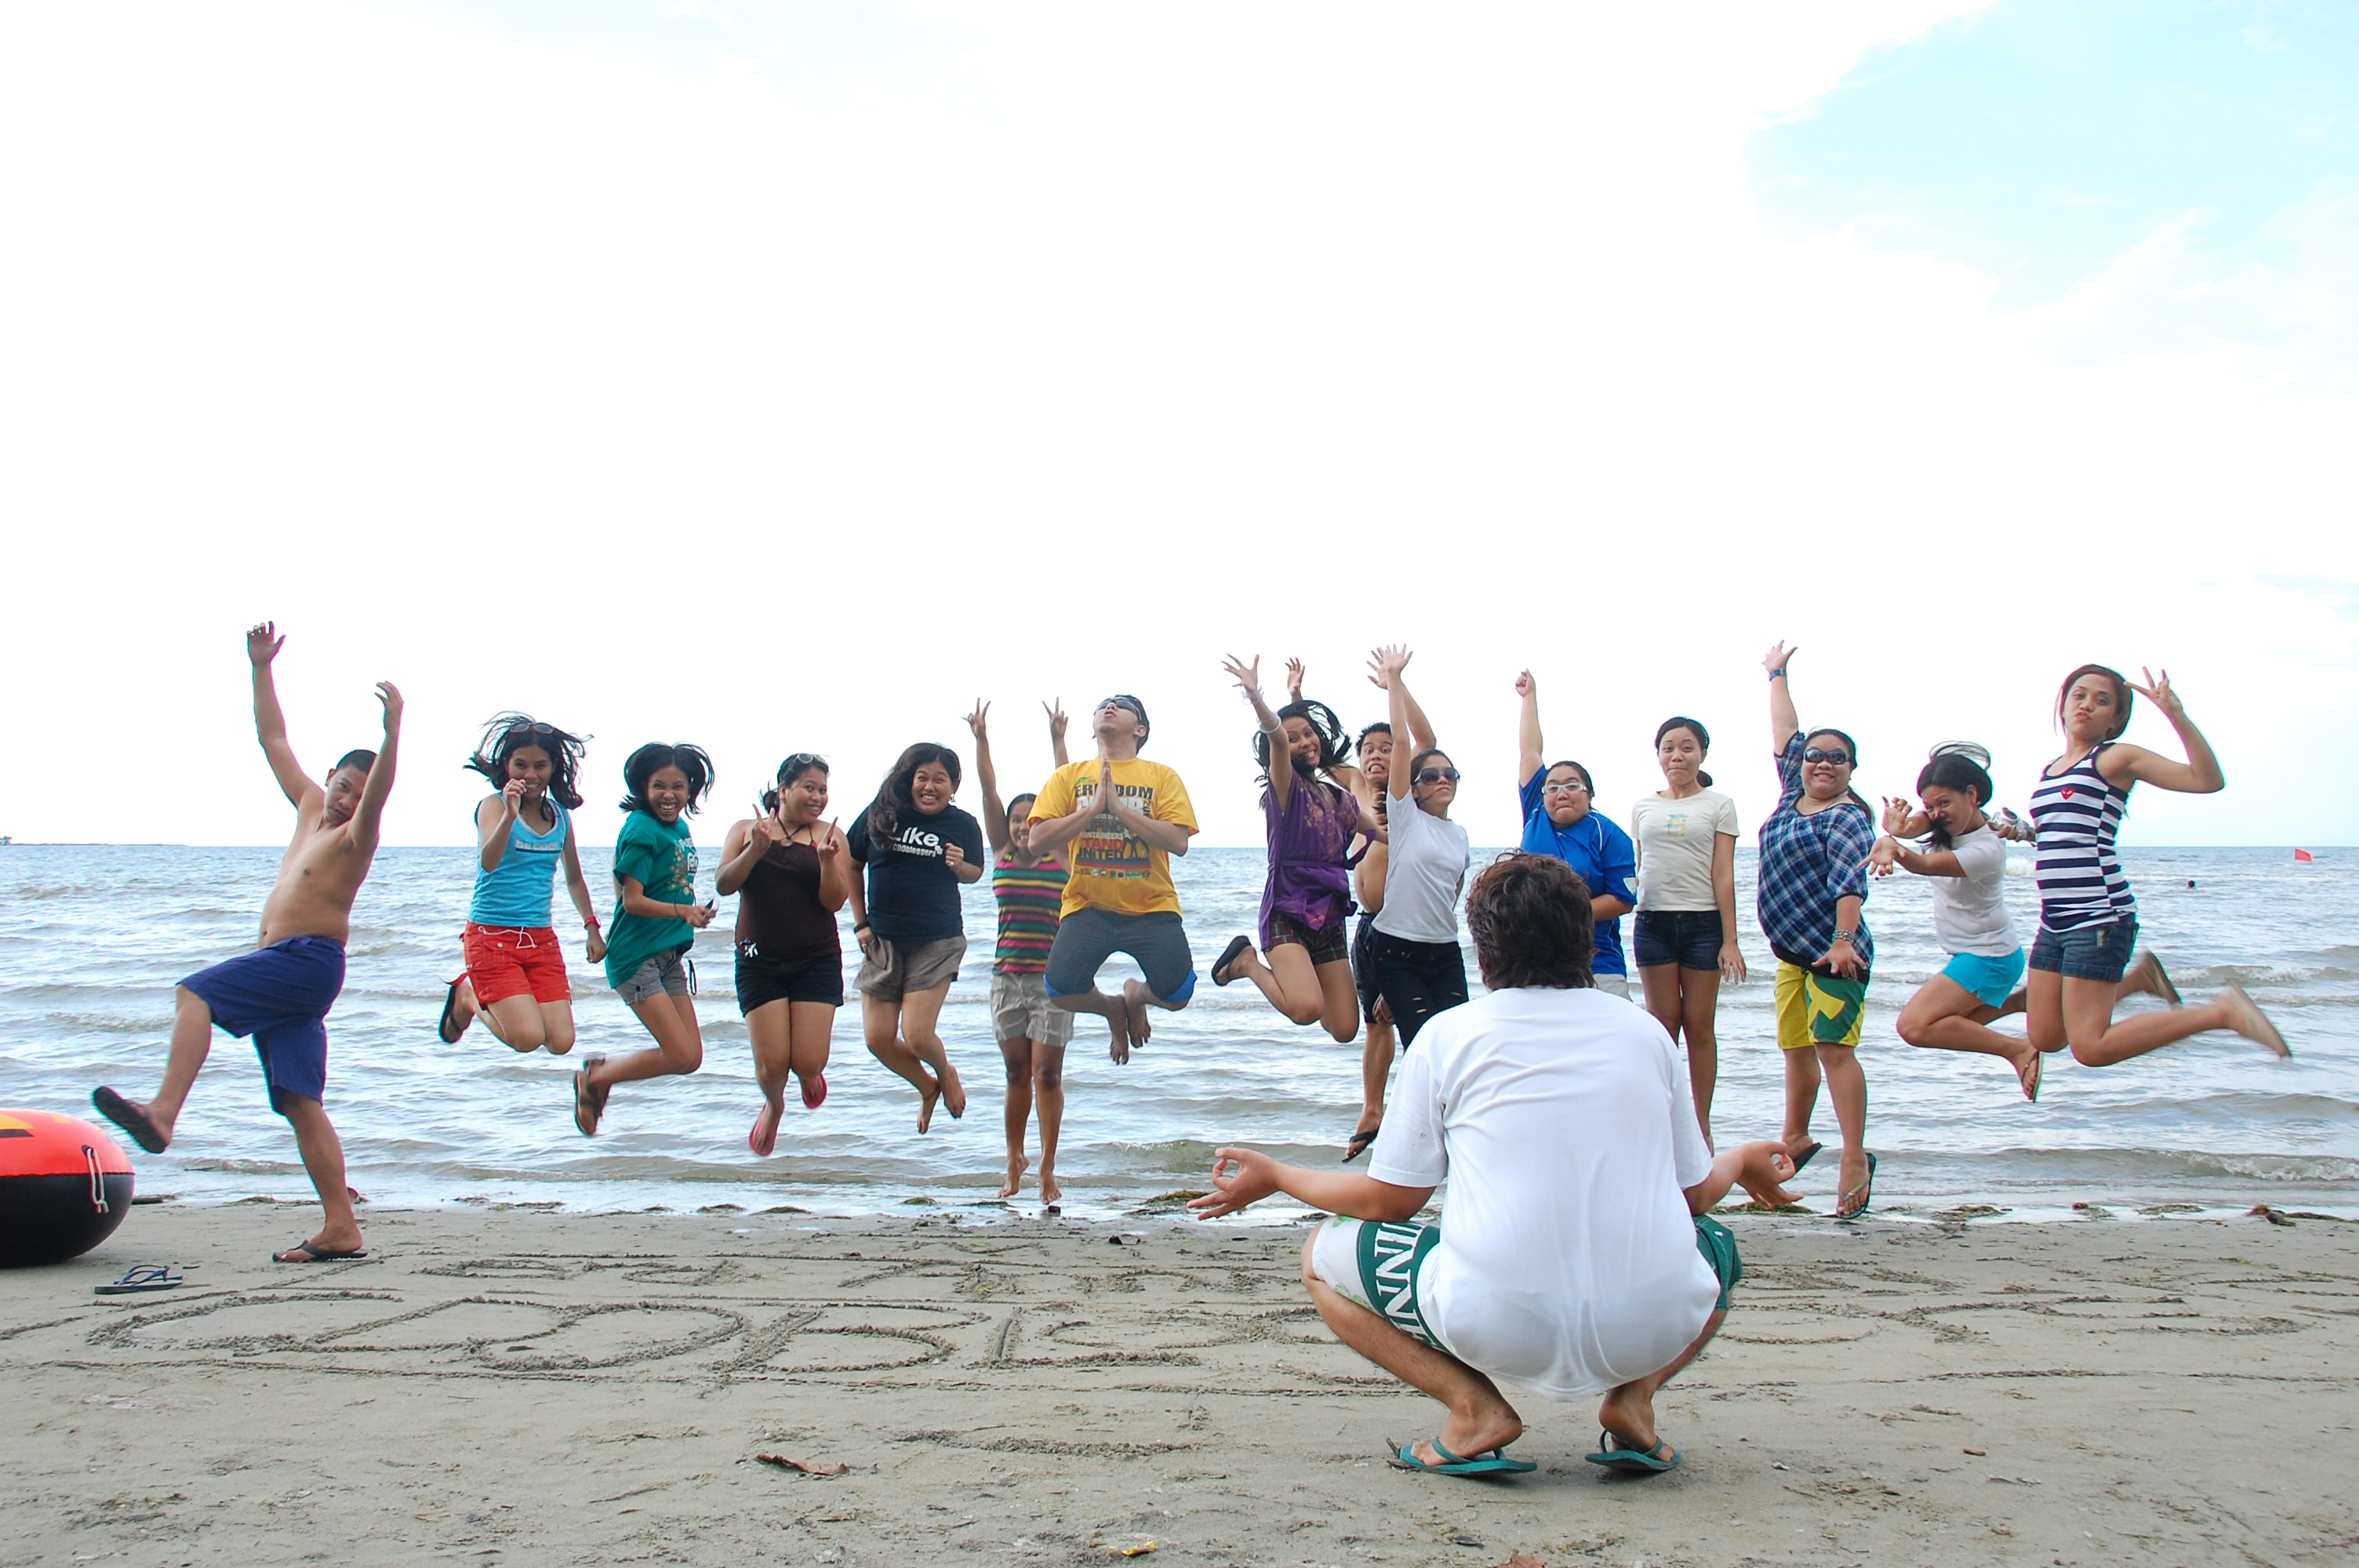 At the beach with the CDO Bloggers – happy 3rd anniversary guys!